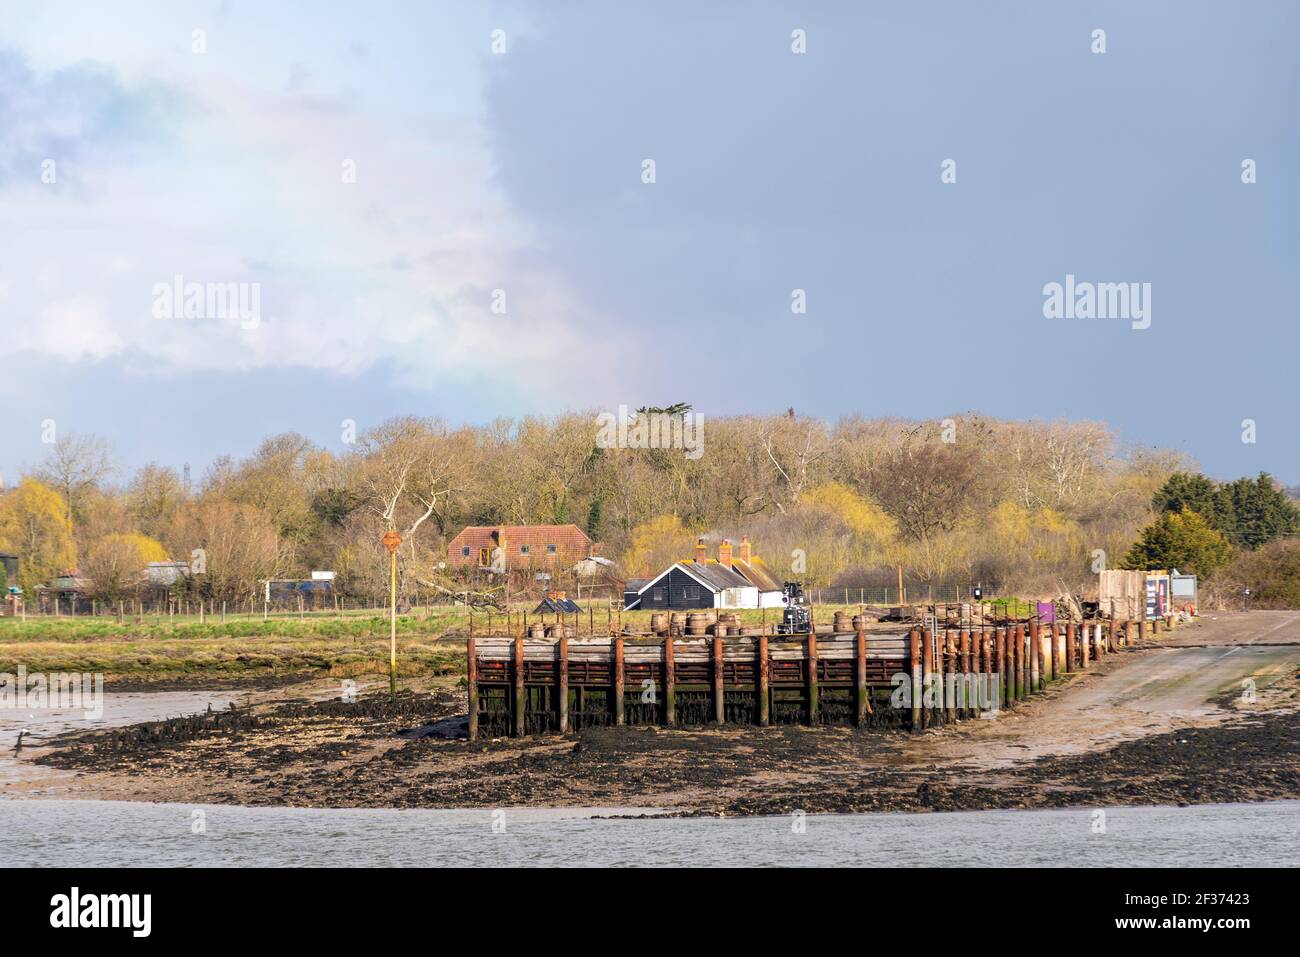 Quay of North Fambridge on the River Crouch, looking from South Fambridge, Rochford, Essex, UK. Rural, countryside dock and slipway Stock Photo